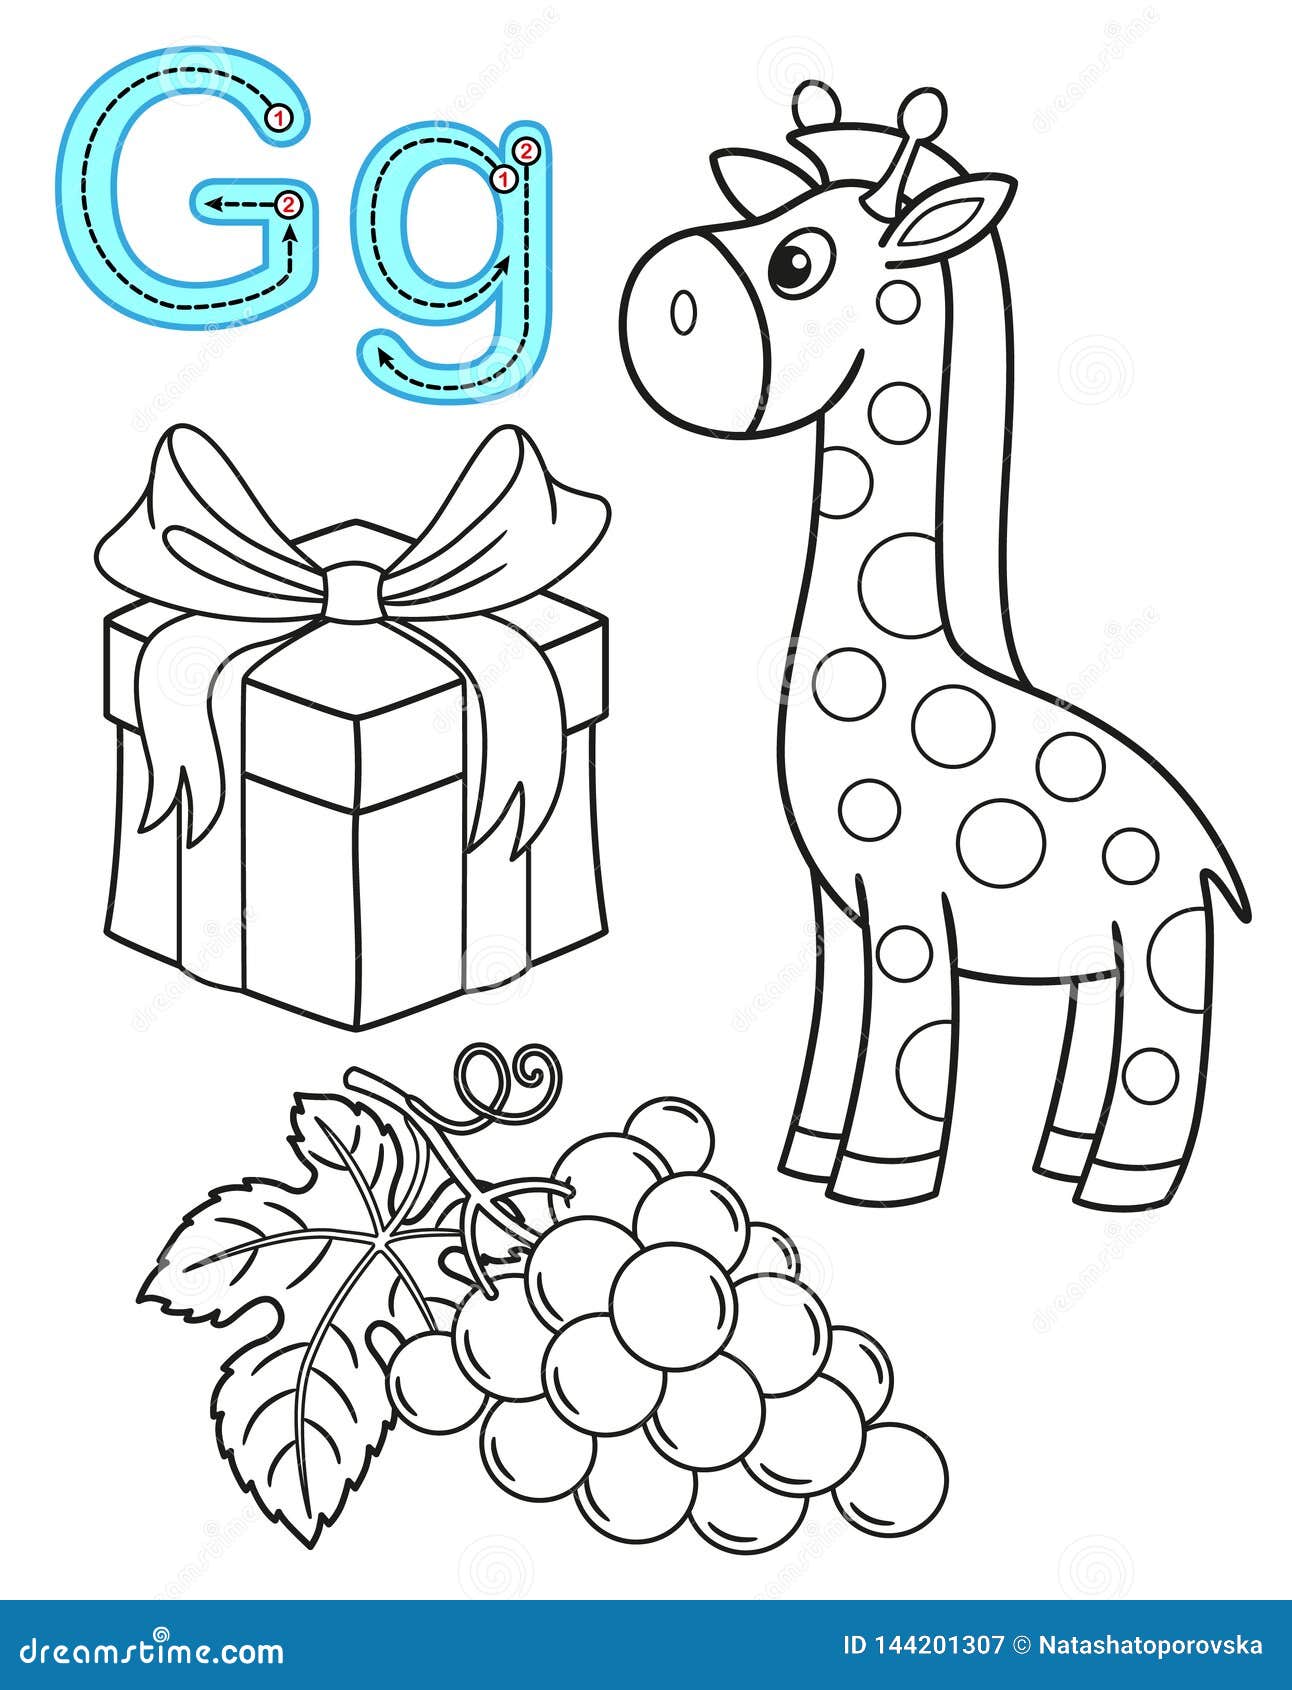 Printable coloring page for kindergarten and preschool card for study english vector coloring book alphabet letter g stock vector